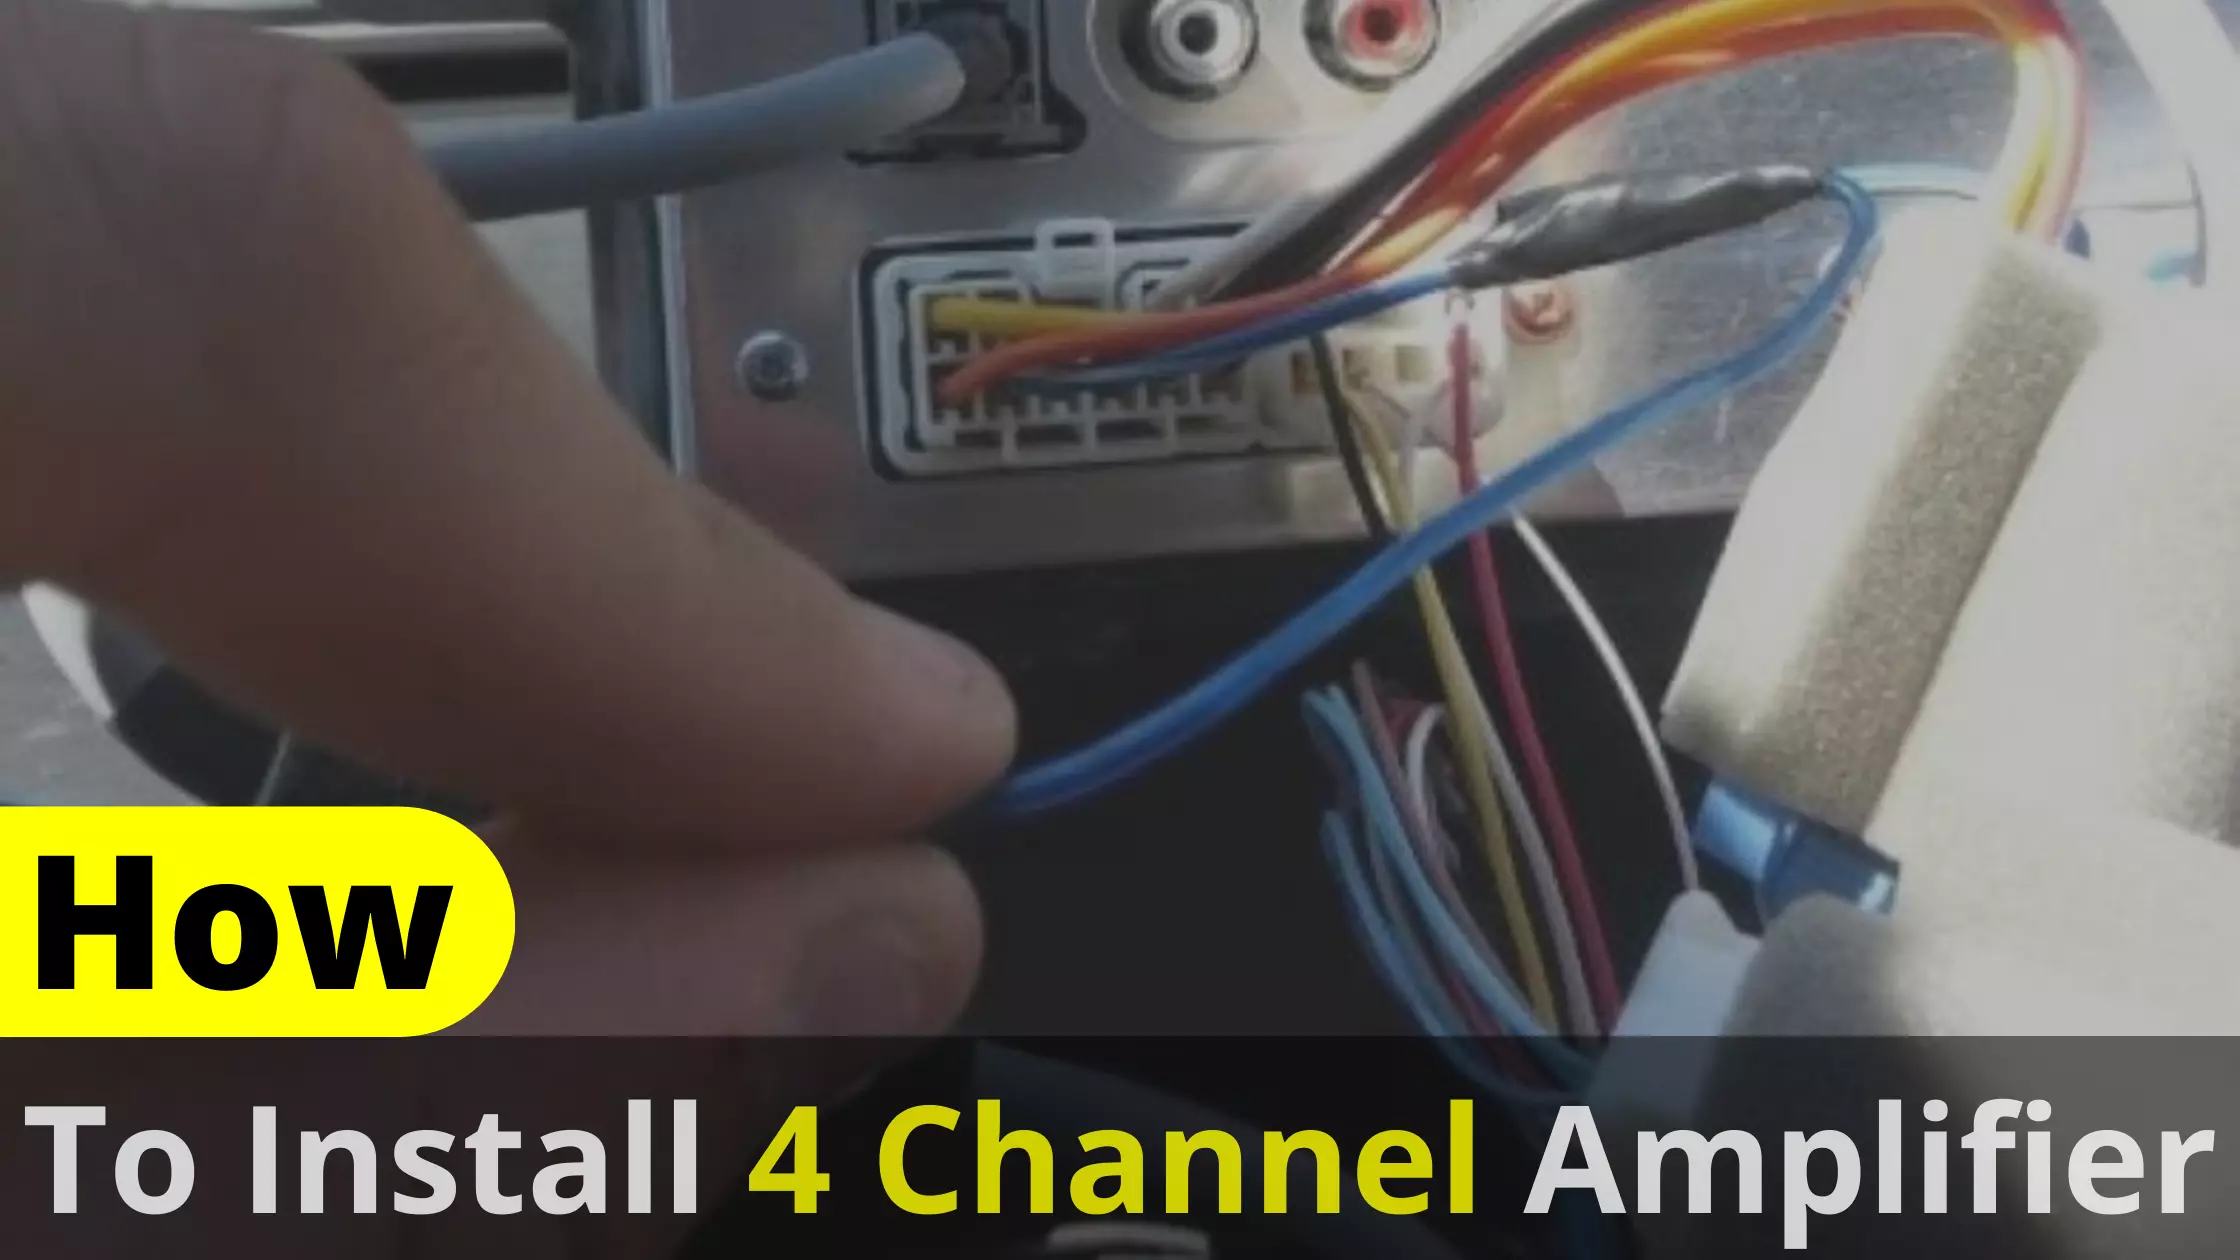 How To Install 4 Channel Amplifier?